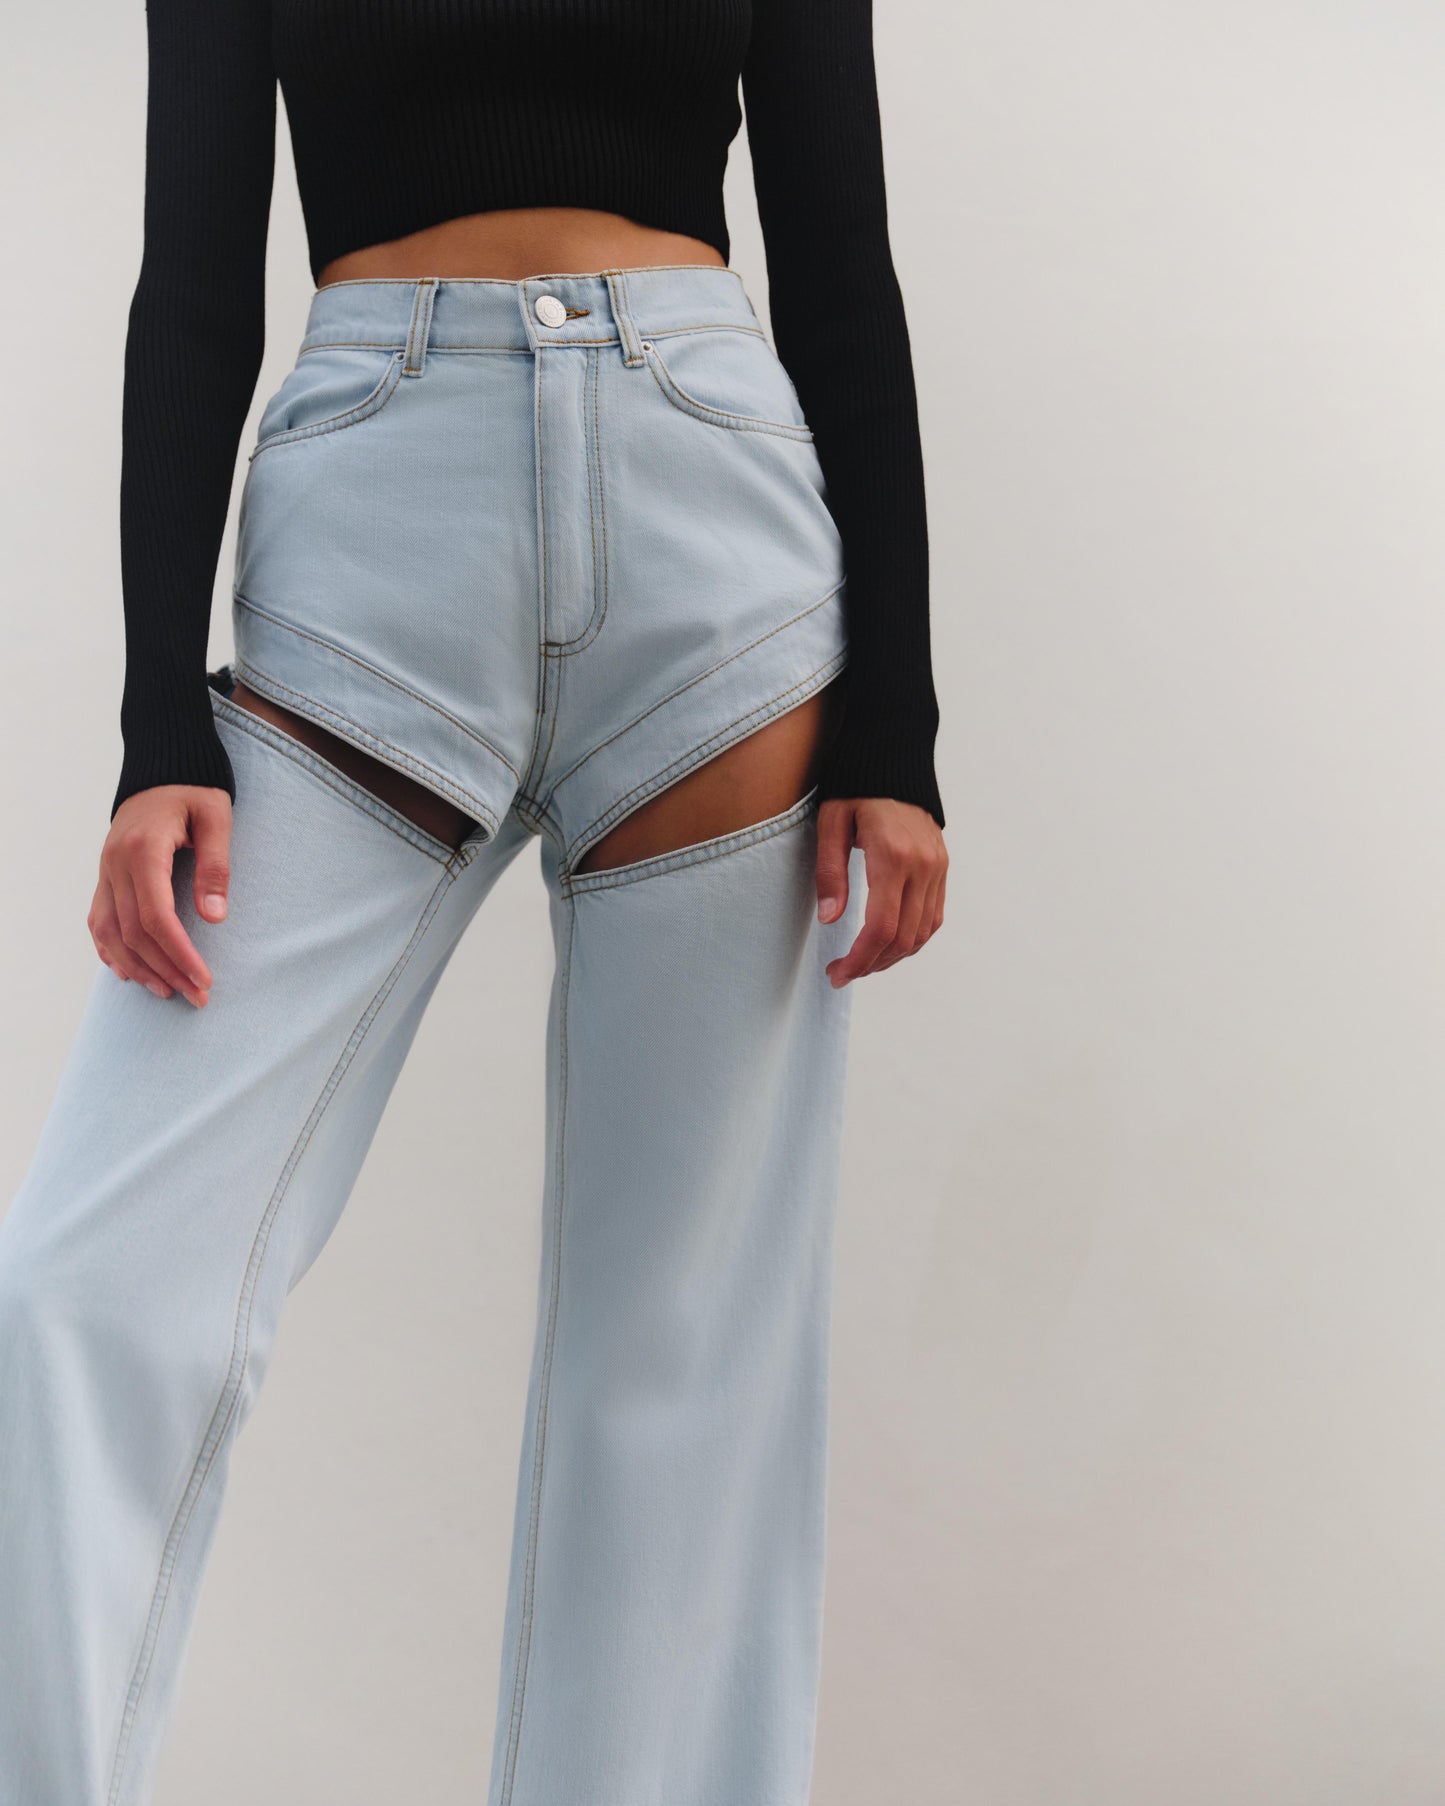 CUT OUT FADED JEANS